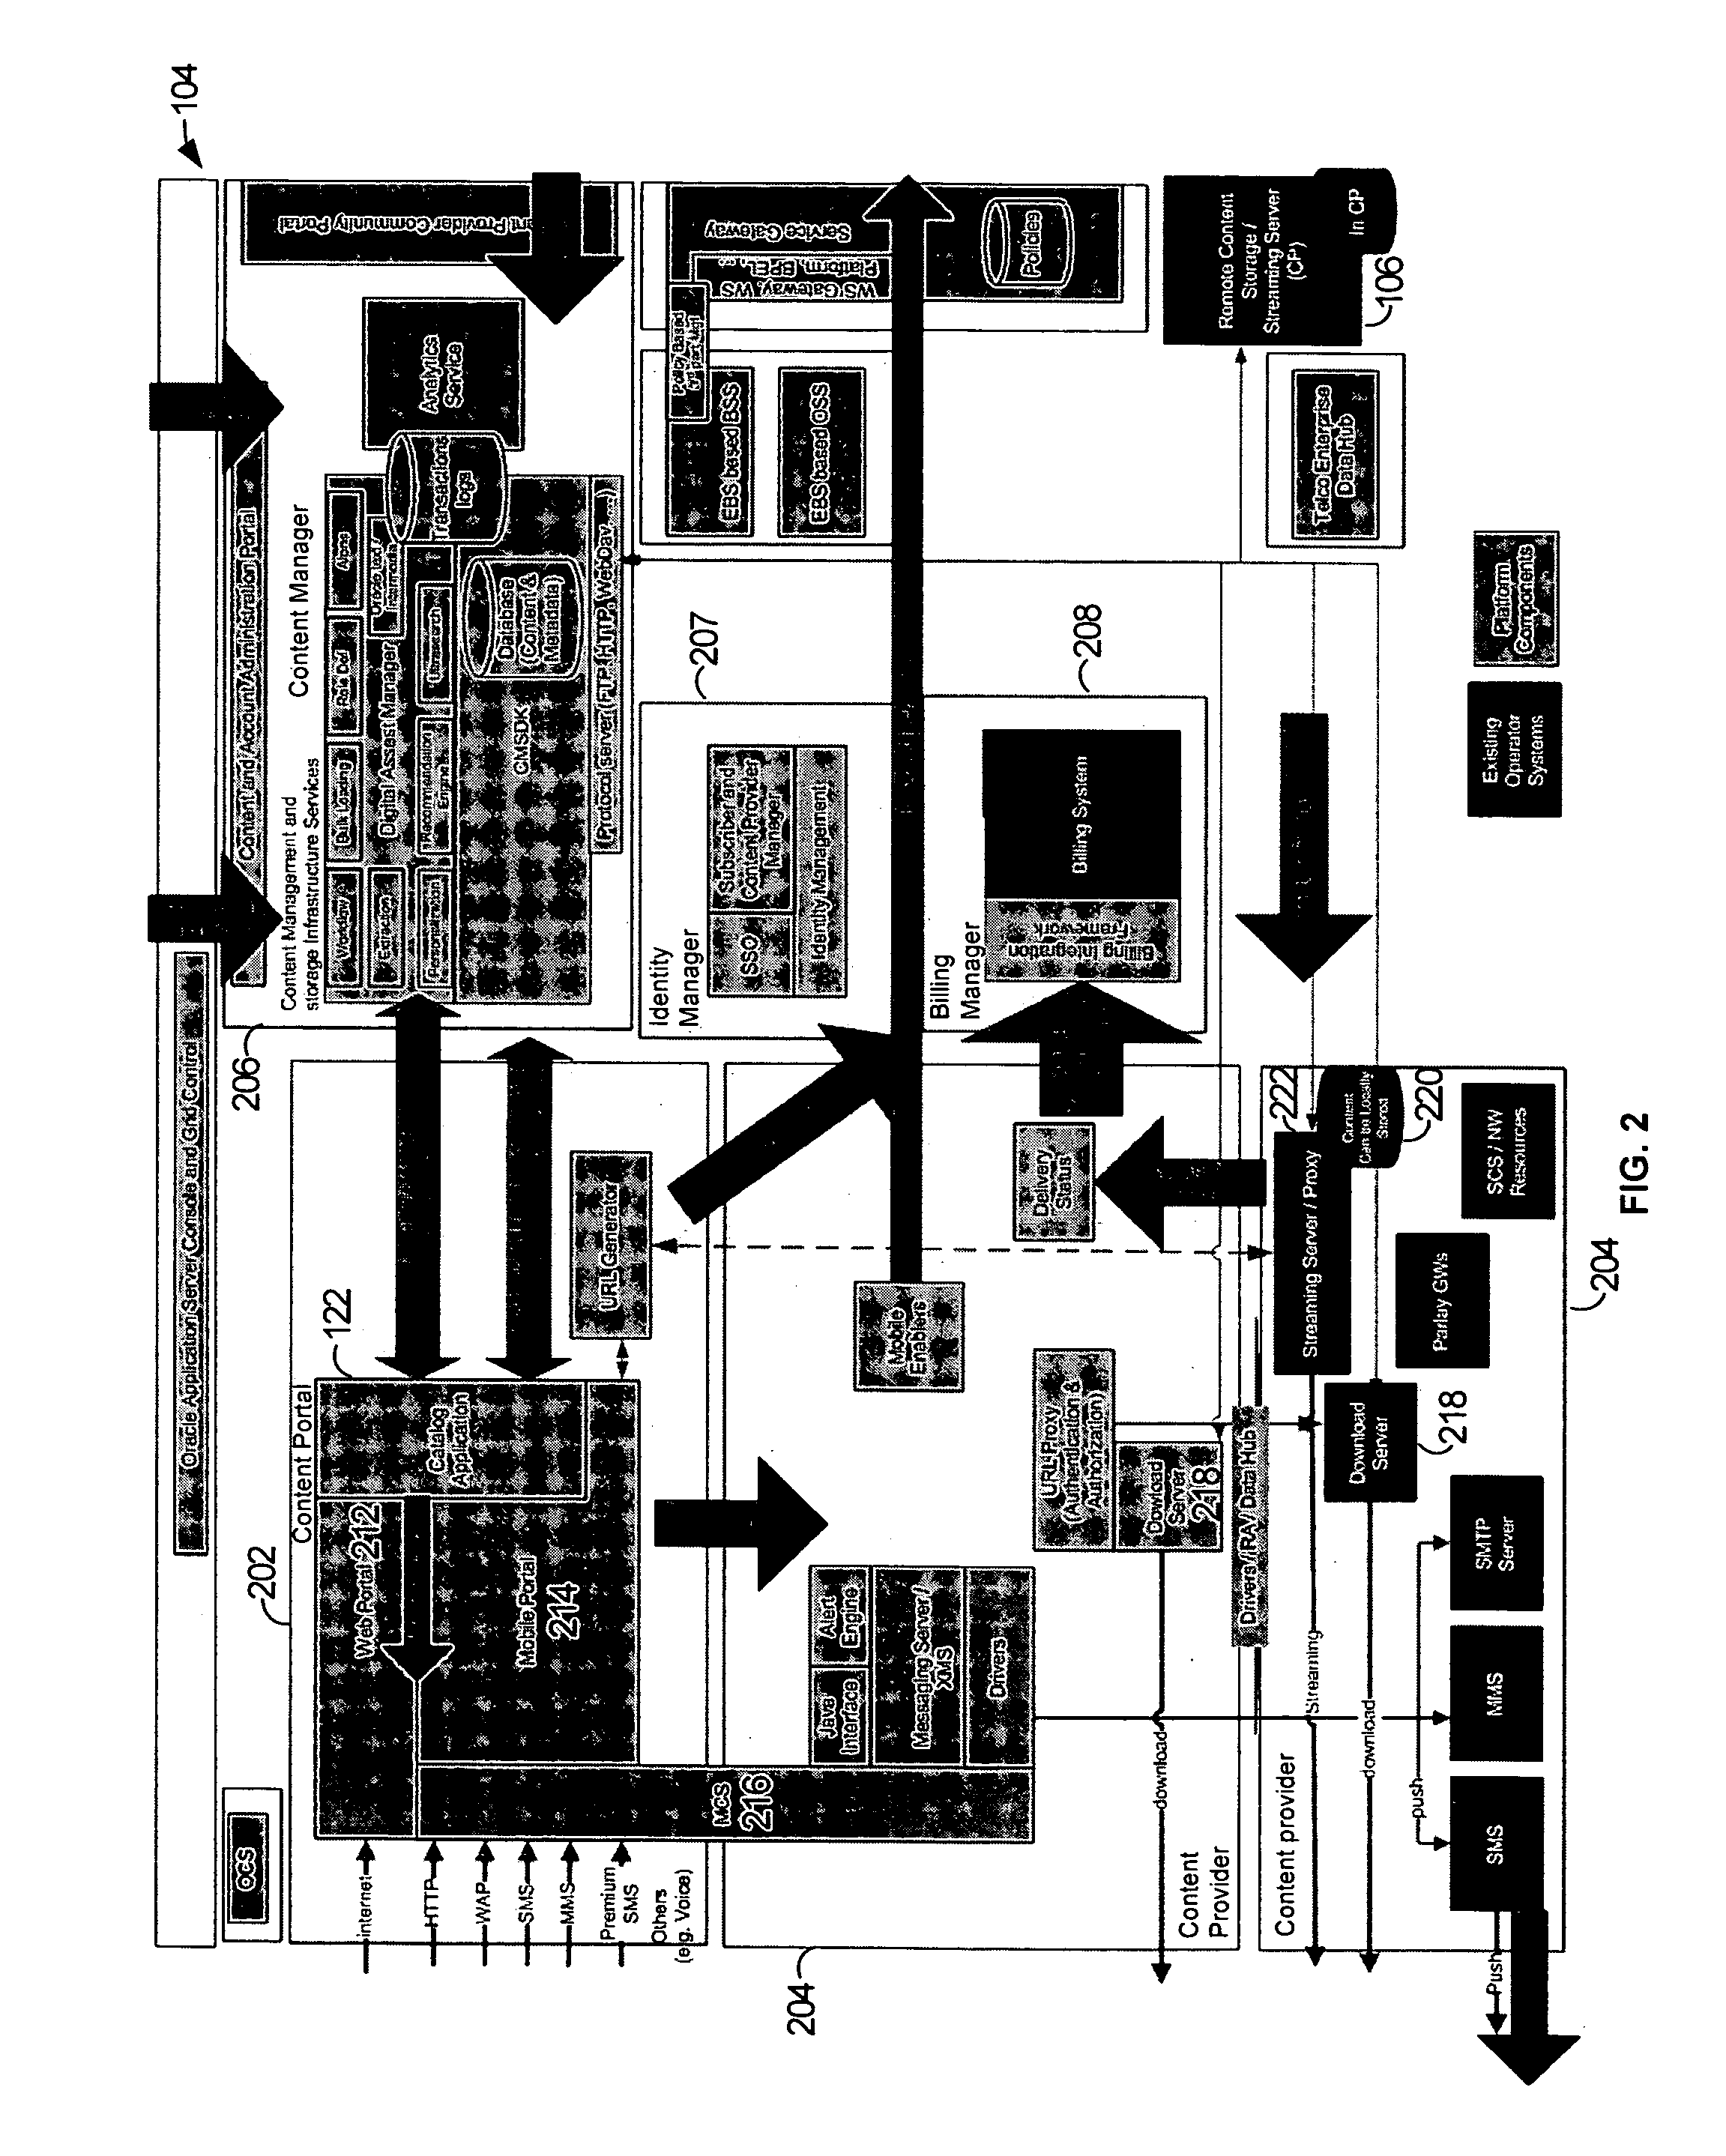 Service level digital rights management support in a multi-content aggregation and delivery system